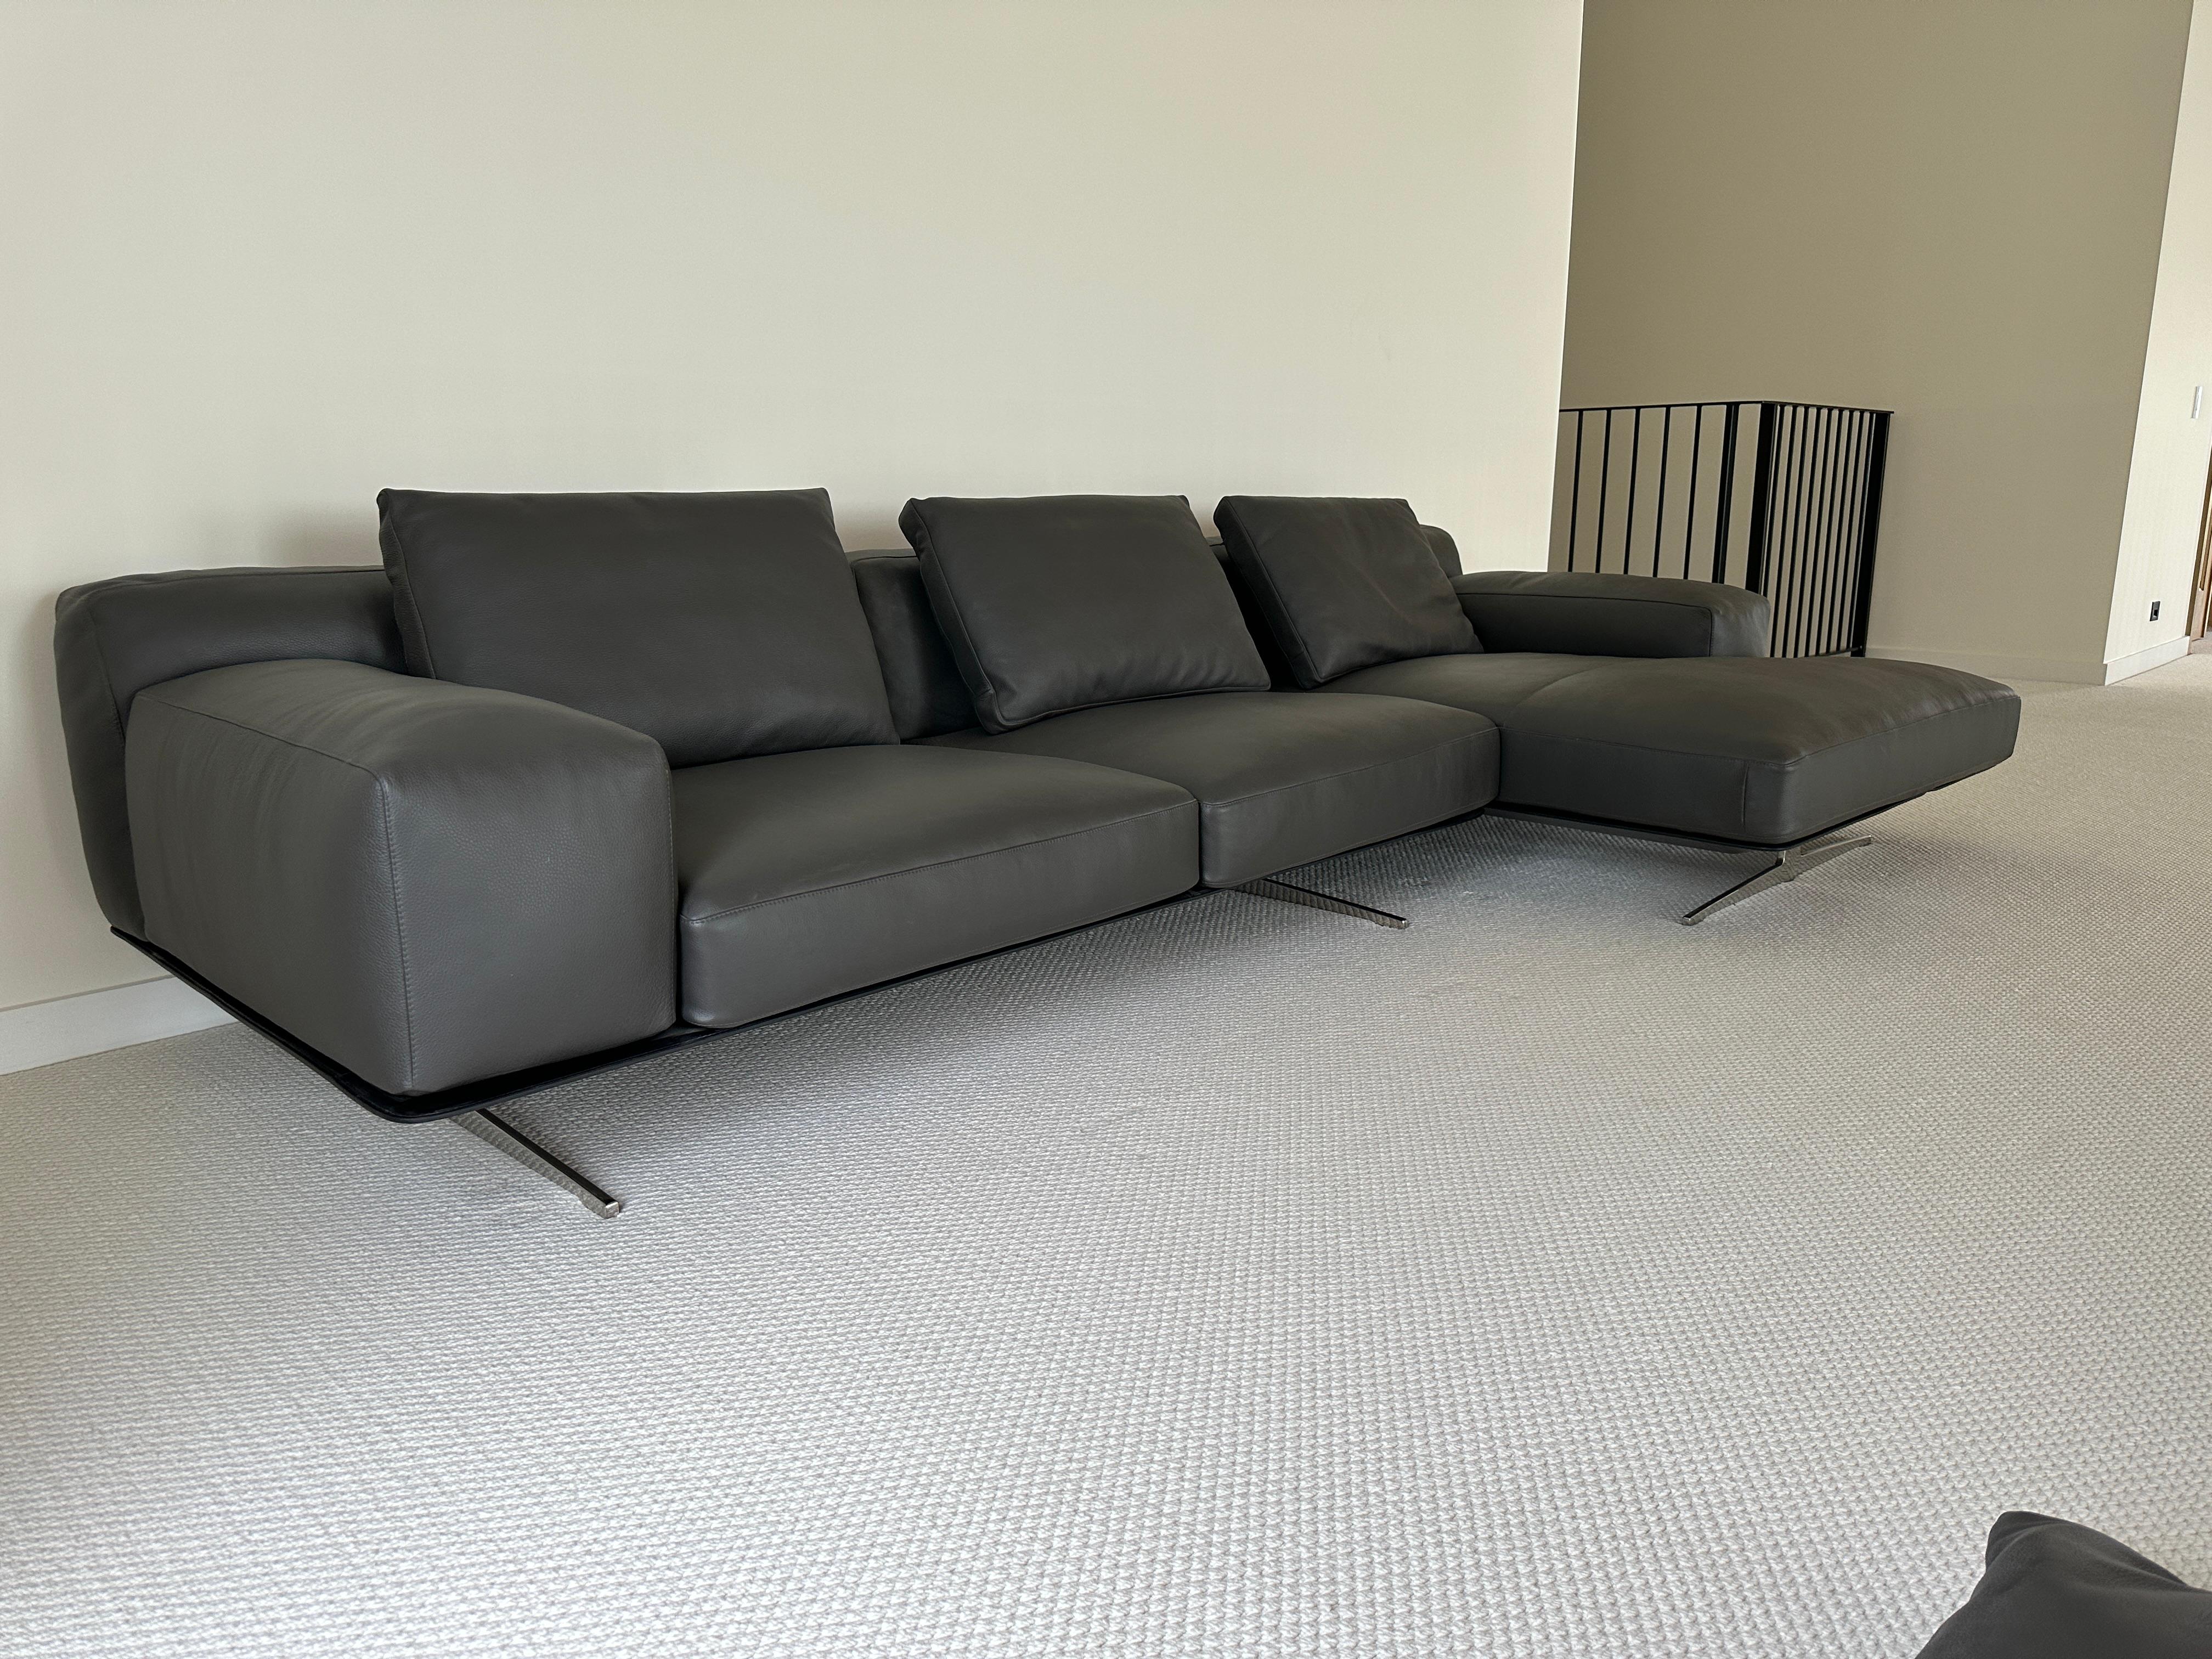 Essentially unused dark grey leather sectional, hand made in Lake Como, Italy and purchased through Palazzetti. Features low profile, wide armrests, thick solid seat and backrest cushions with sleek and minimal chrome legs. Comes with three backrest